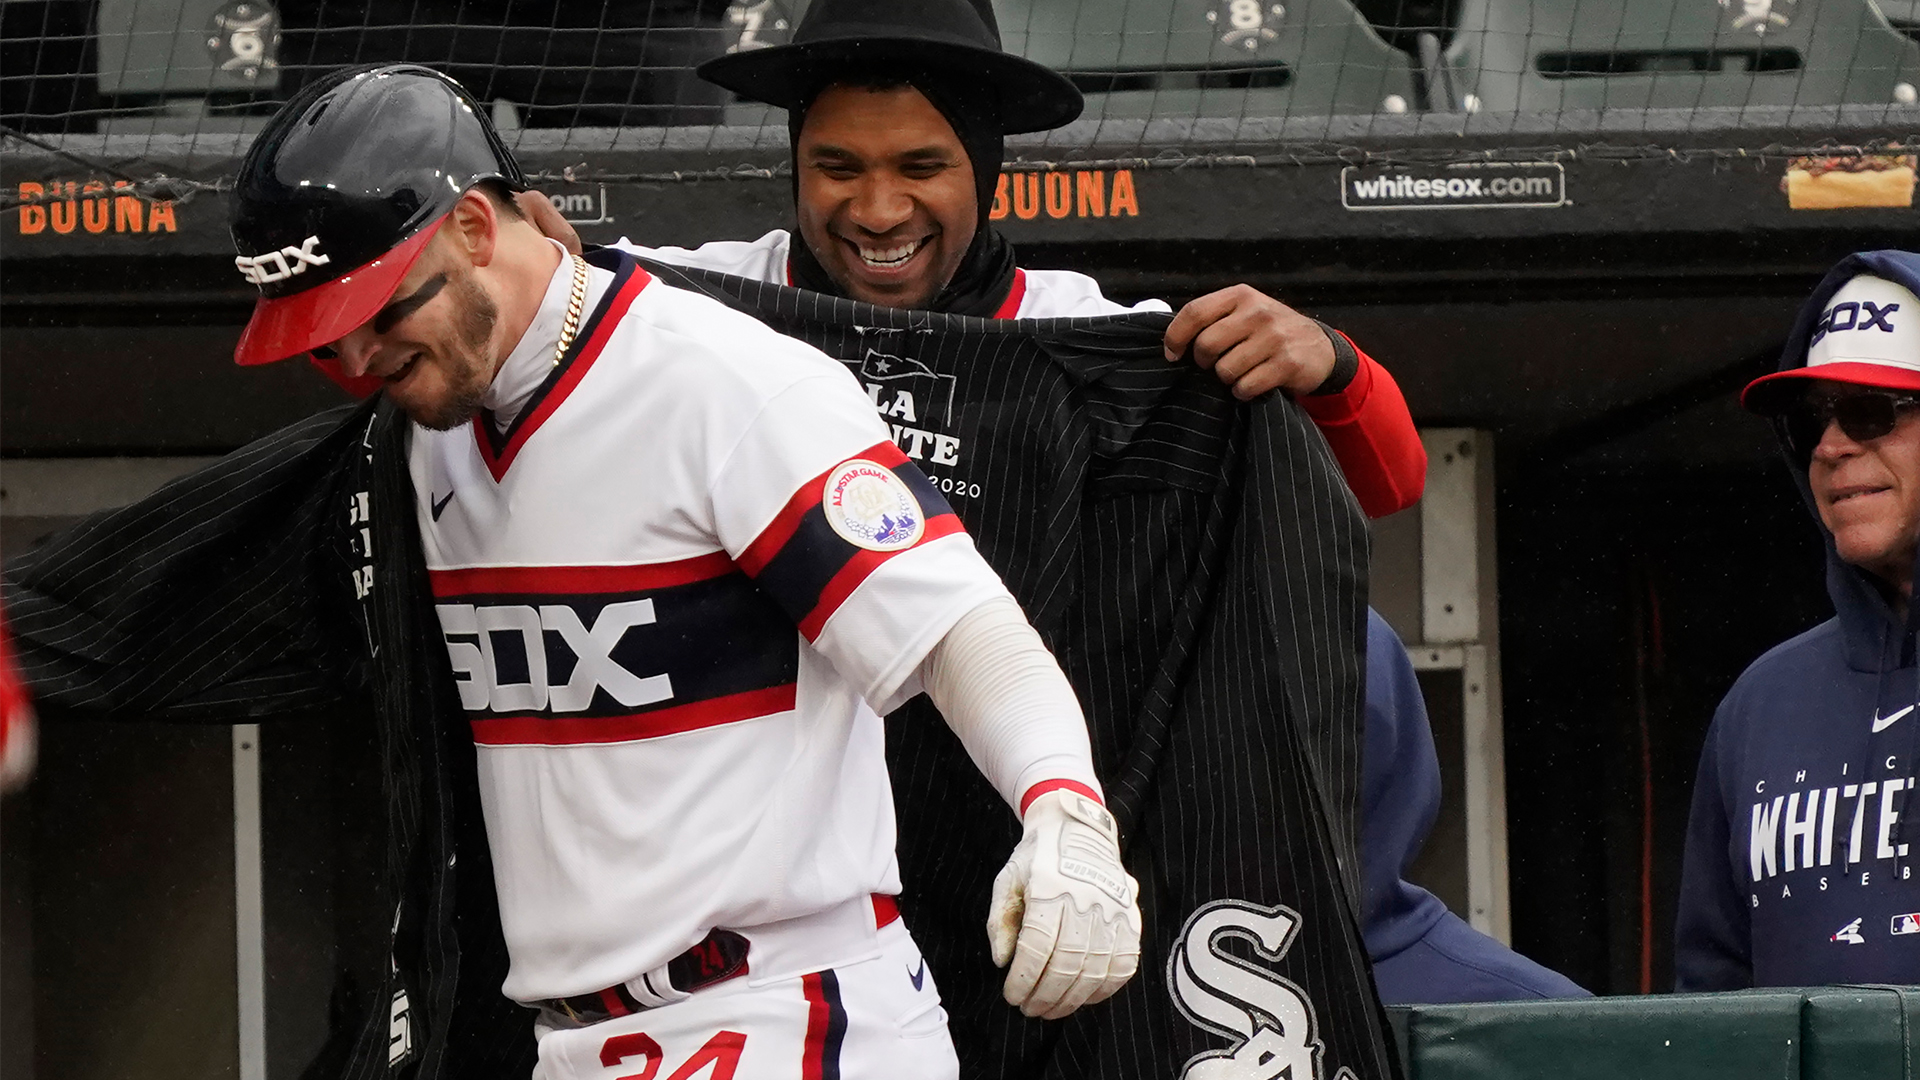 White Sox excited to wear throwback uniforms for free game against